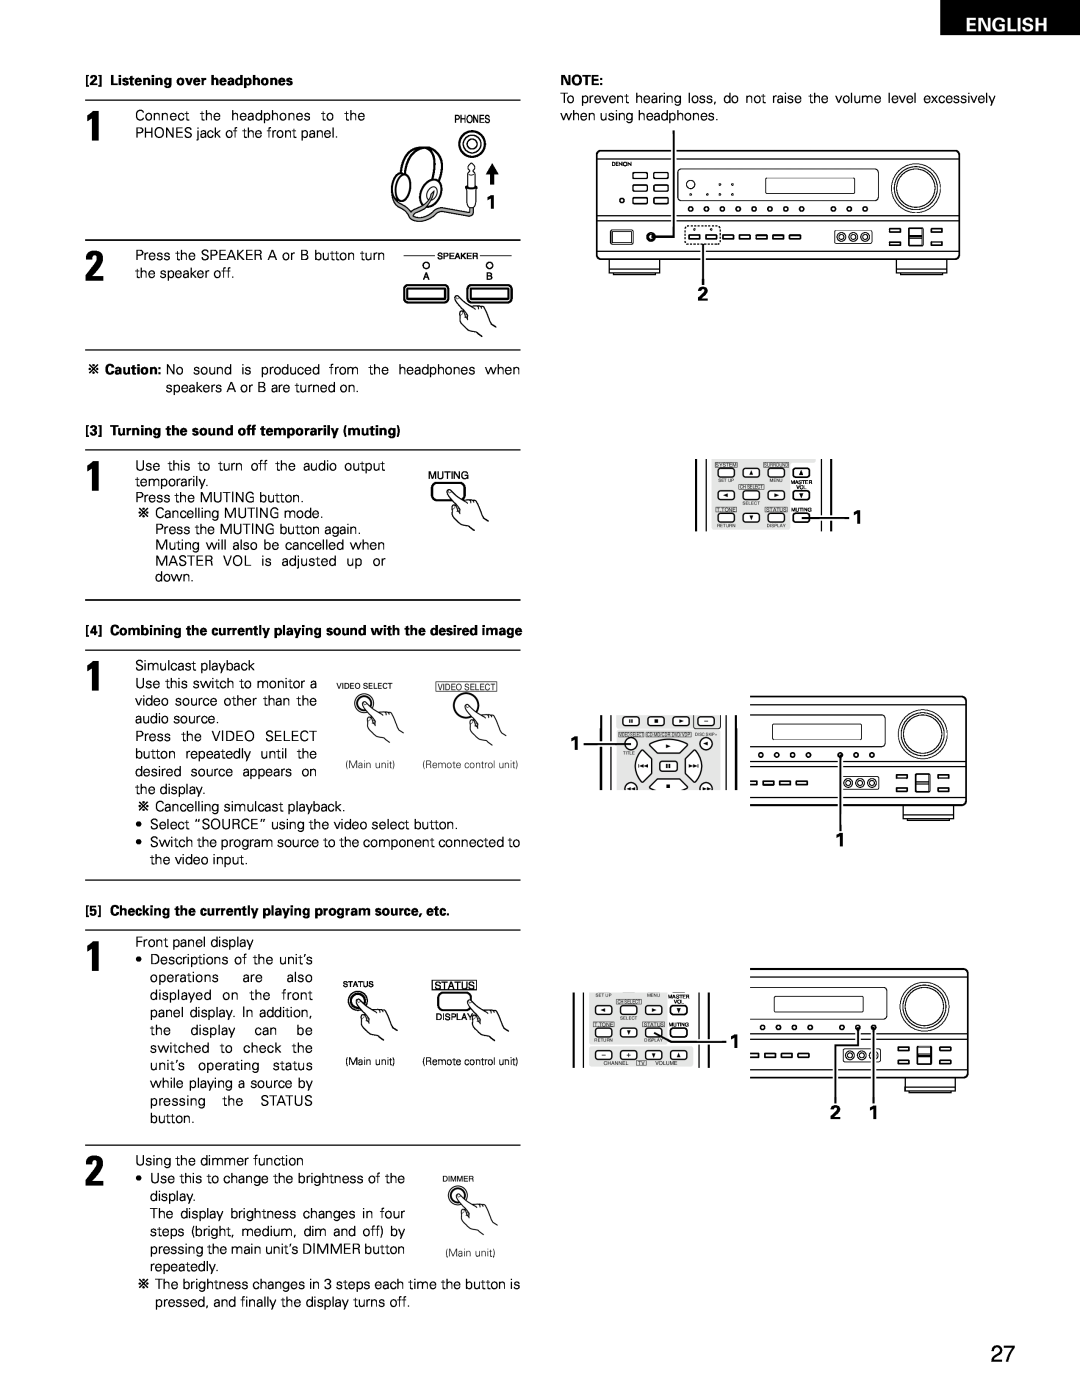 Denon AVR-682, AVR-1602 manual English, Listening over headphones, Turning the sound off temporarily muting 